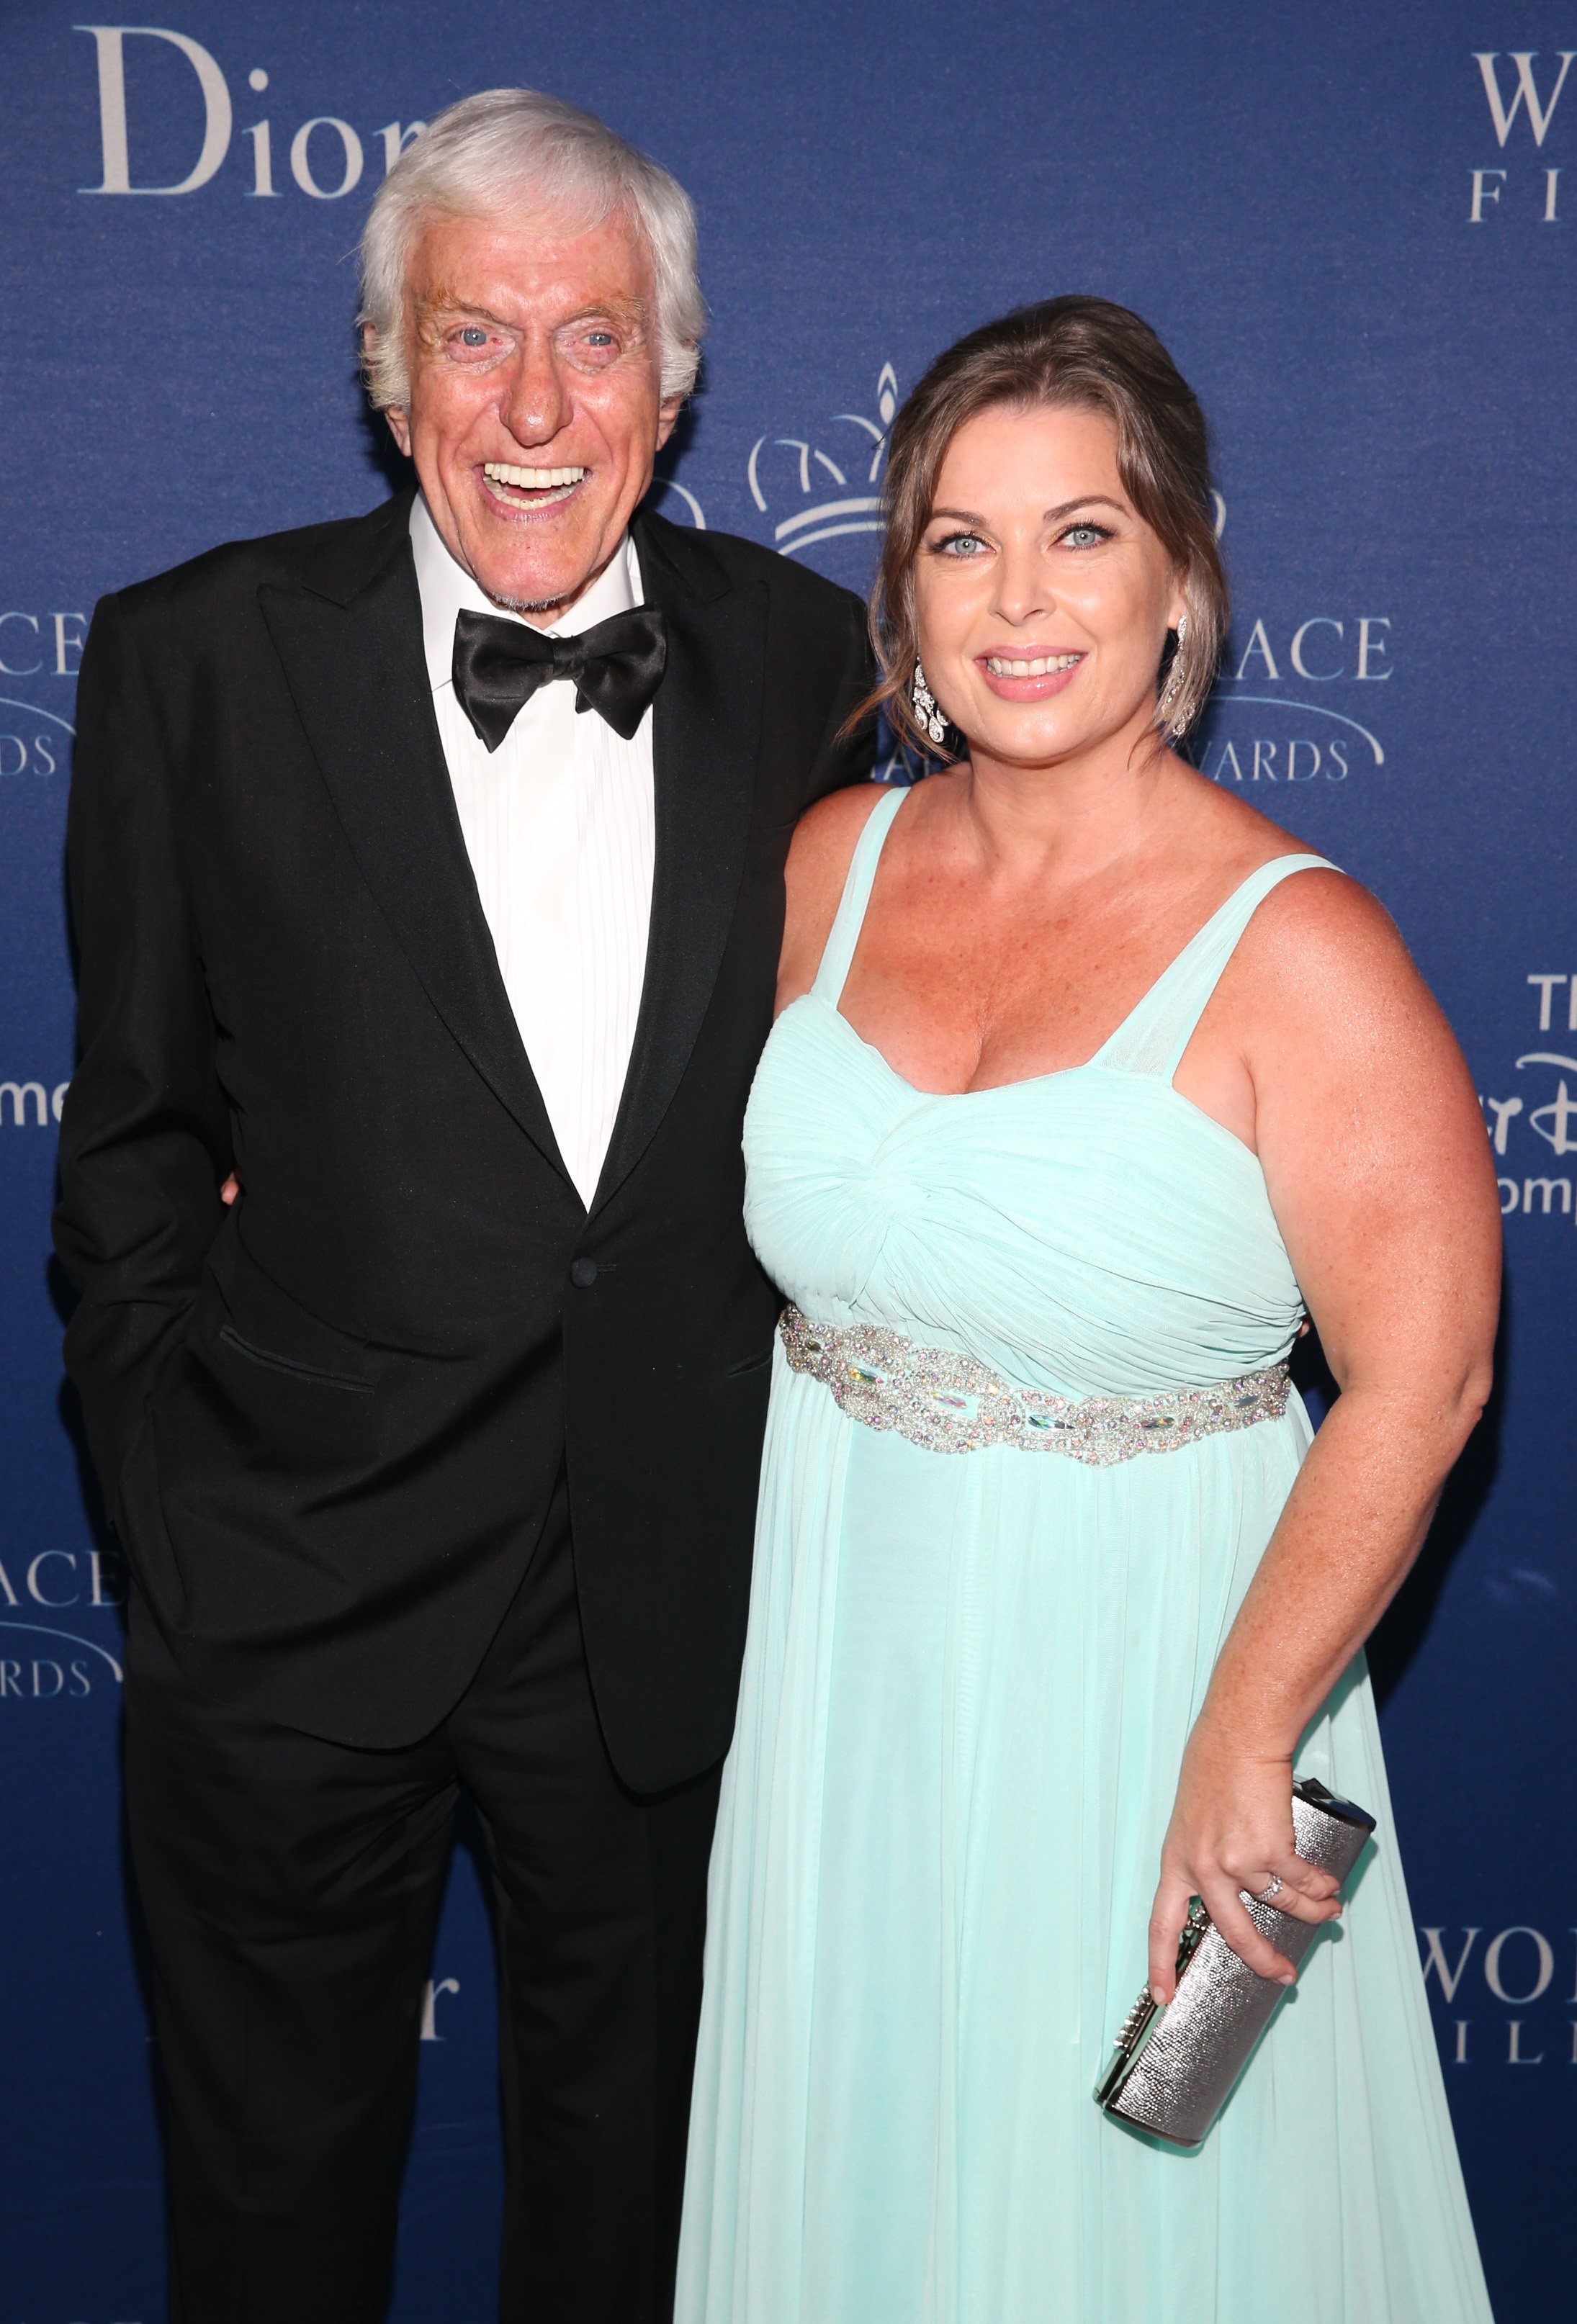 Dick Van Dyke and Arlene Silver at the Princess Grace Awards Gala on October 8, 2014, in Beverly Hills. | Source: Getty Images